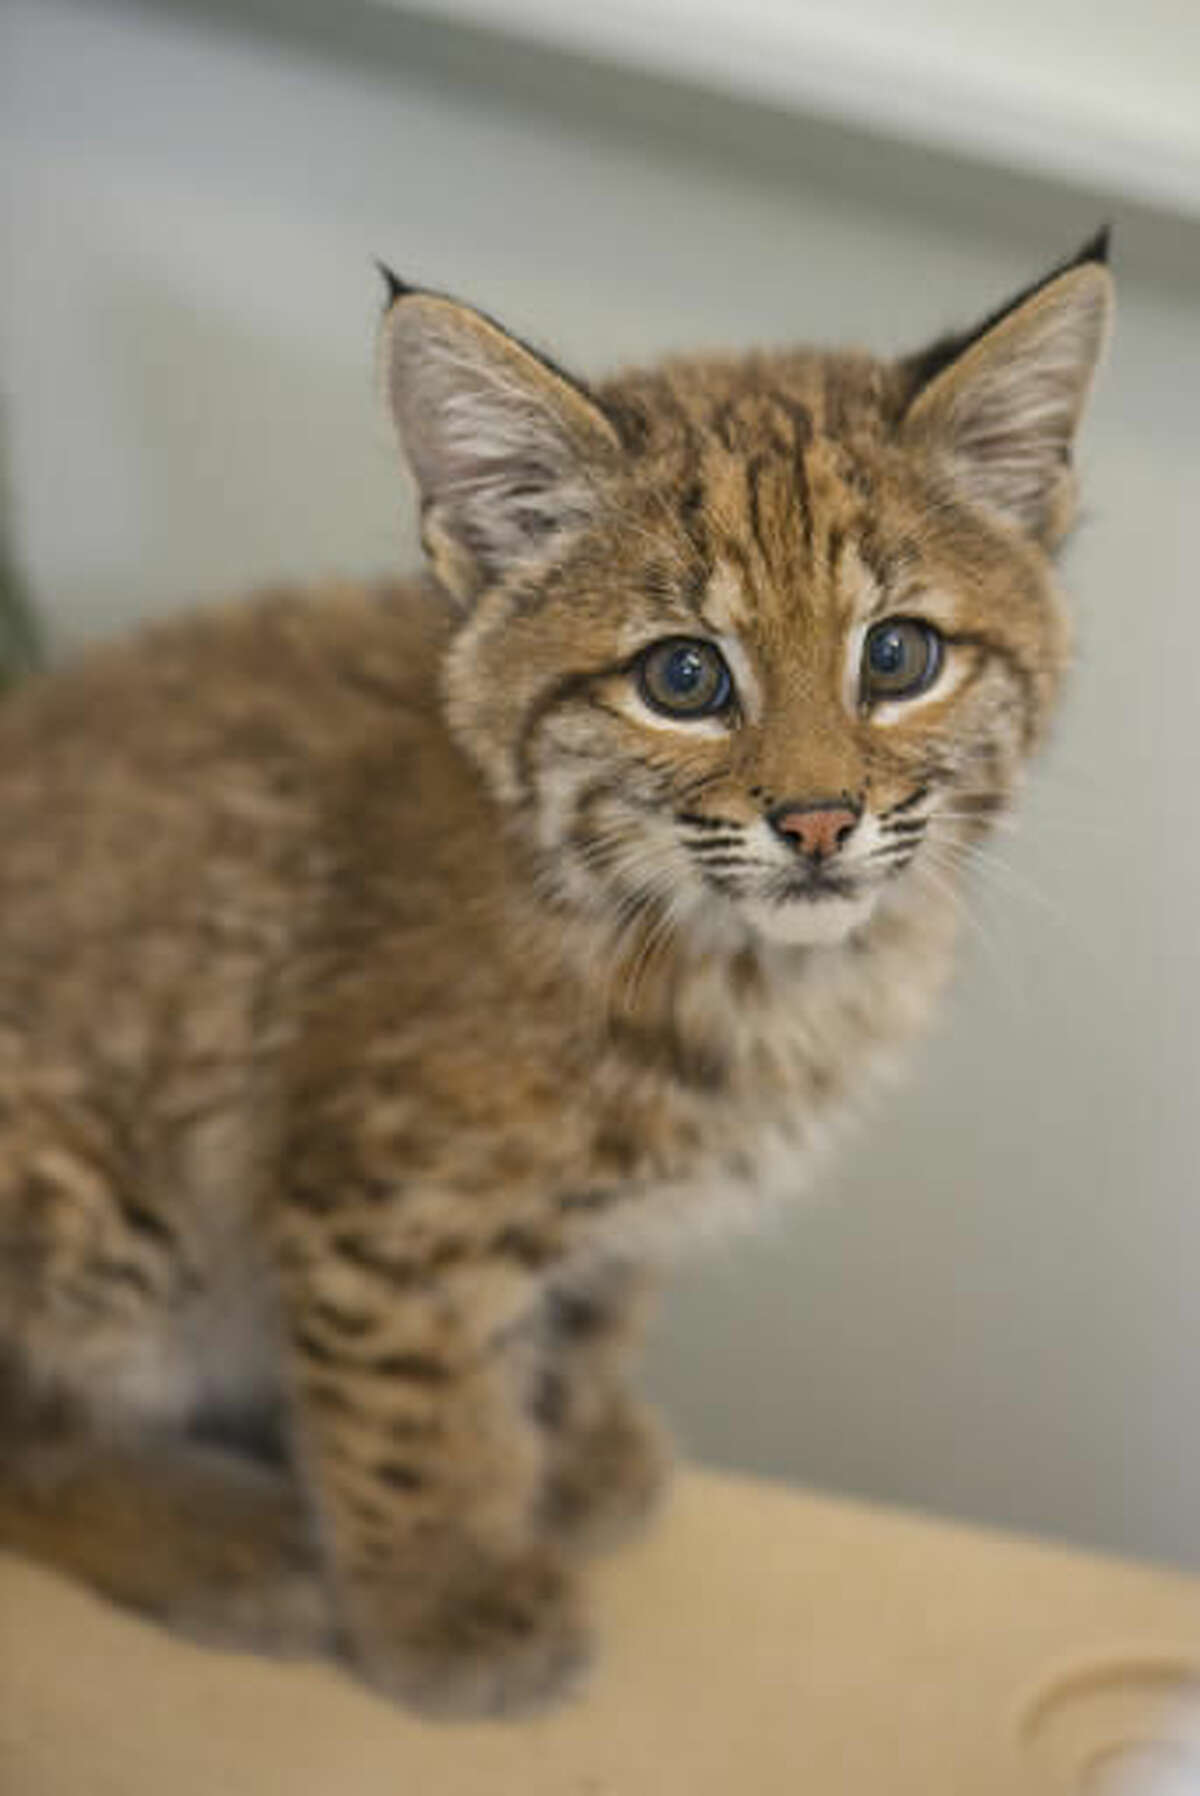 This undated photo provided by the Oregon Zoo shows an orphaned bobcat kitten in the Veterinary Medical Center at the Oregon Zoo in Portland, Ore. The Zoo has taken in the 2-month-old bobcat kitten that was removed from the wild near Eagle Point, Ore., by well-intentioned but misguided humans. The Zoo said in a statement Thursday, Aug. 4, 2016, that the kitten will remain behind the scenes while he awaits transport to another zoo that can house him permanently. (Michael Durham/Oregon Zoo via AP)